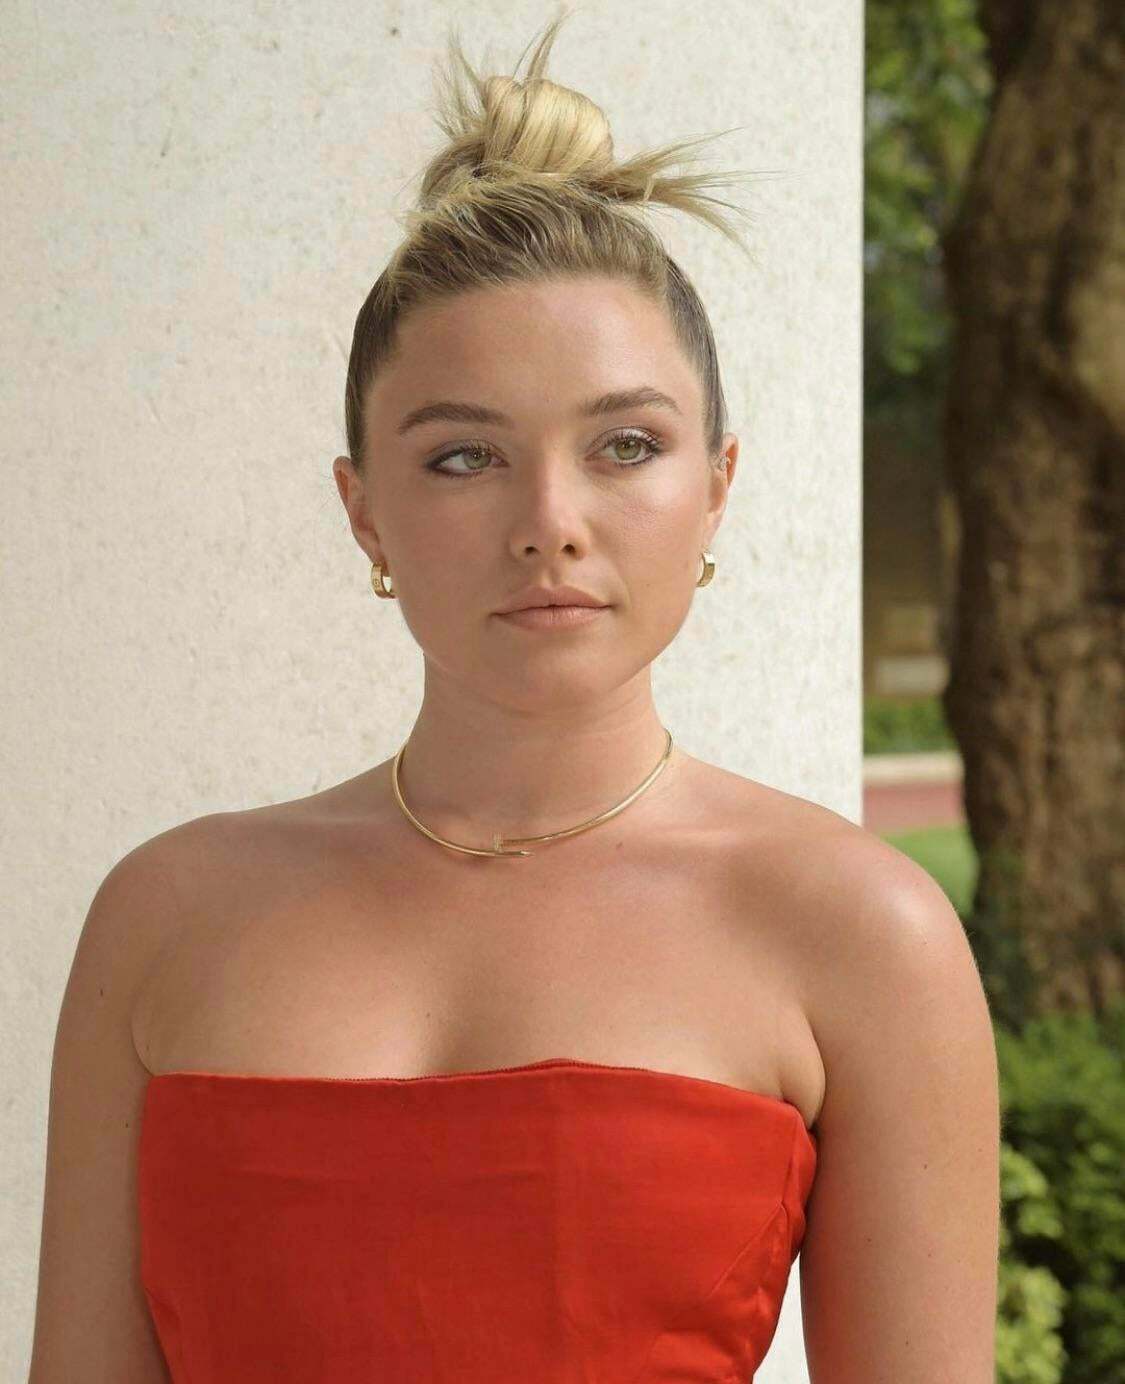 What would you do with Florence Pugh if u had